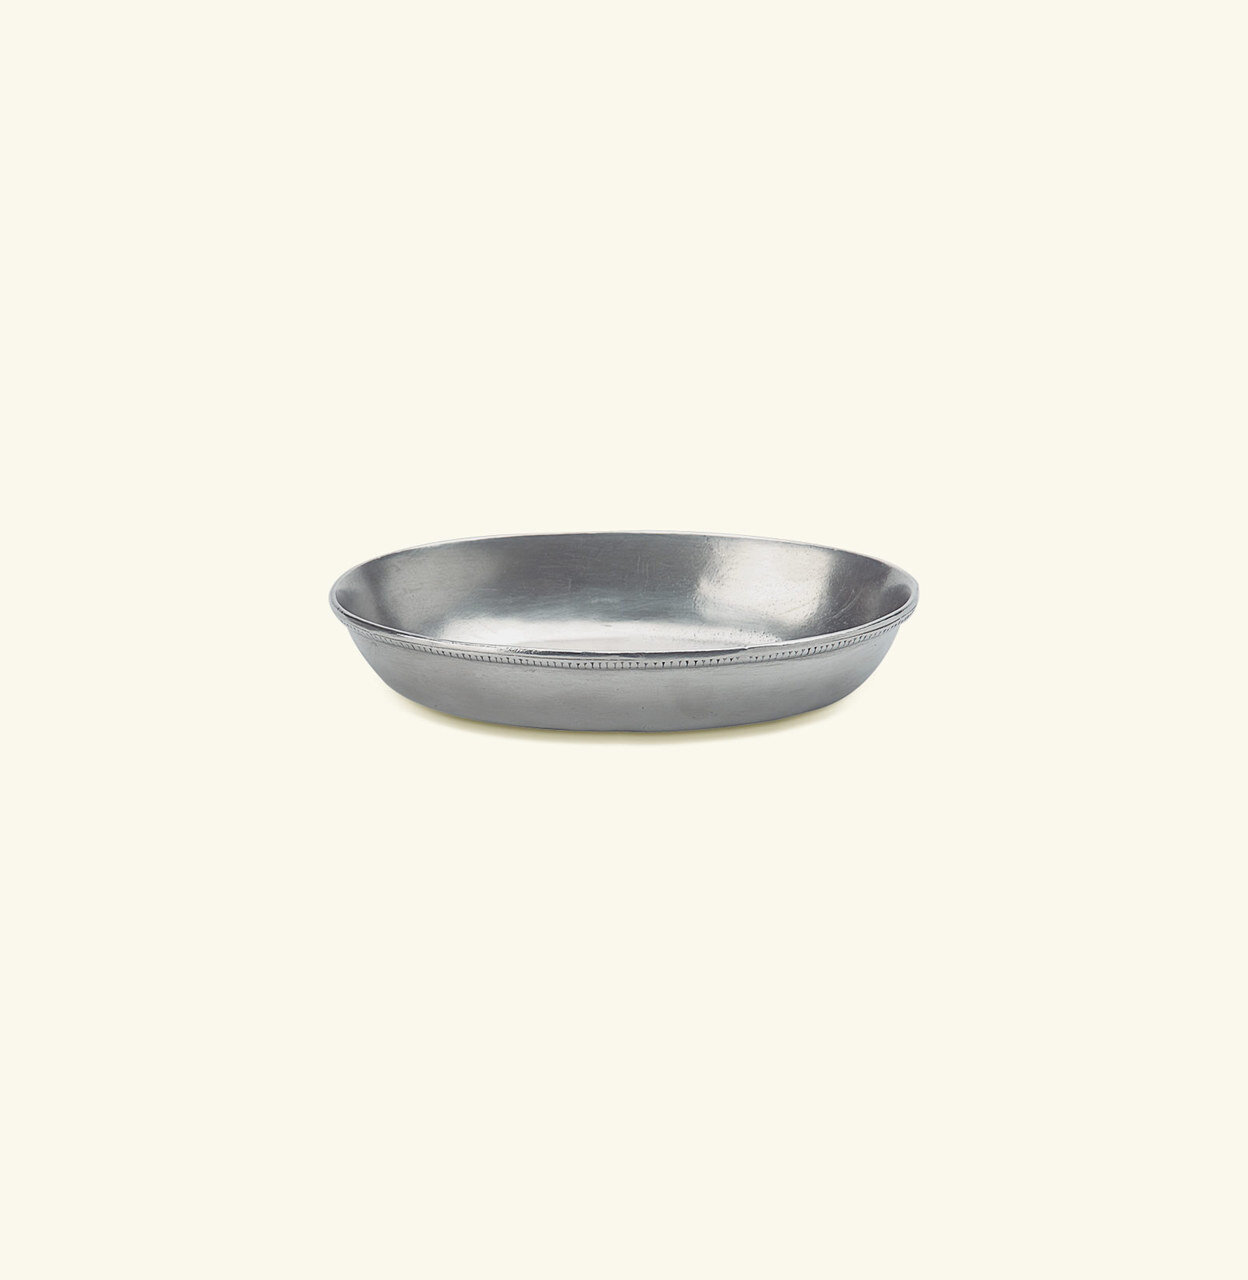 Match Pewter Oval Soap Dish a564.0